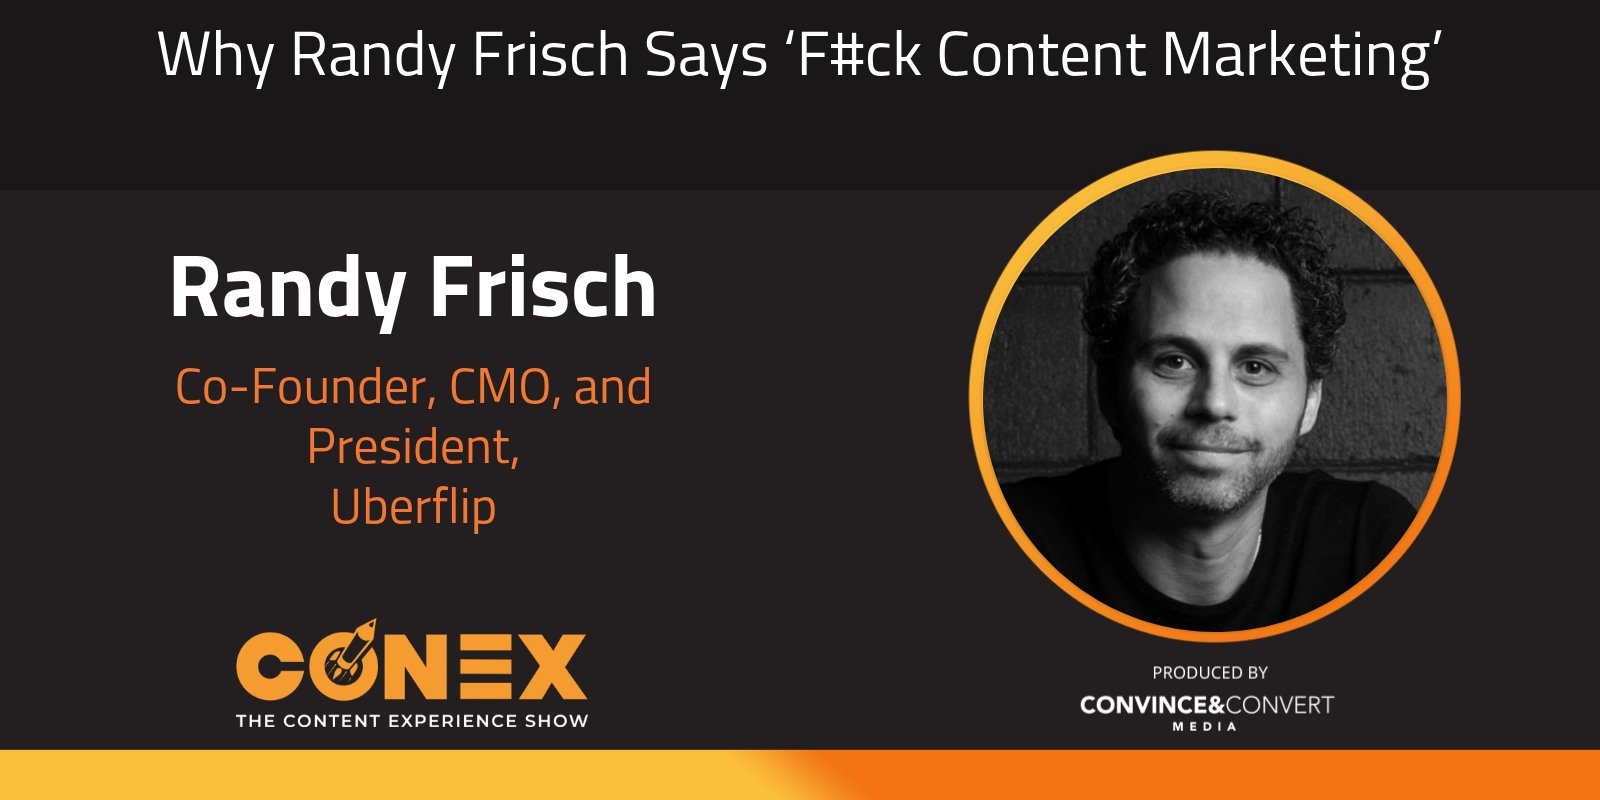 Why Randy Frisch Says ‘F#ck Content Marketing’